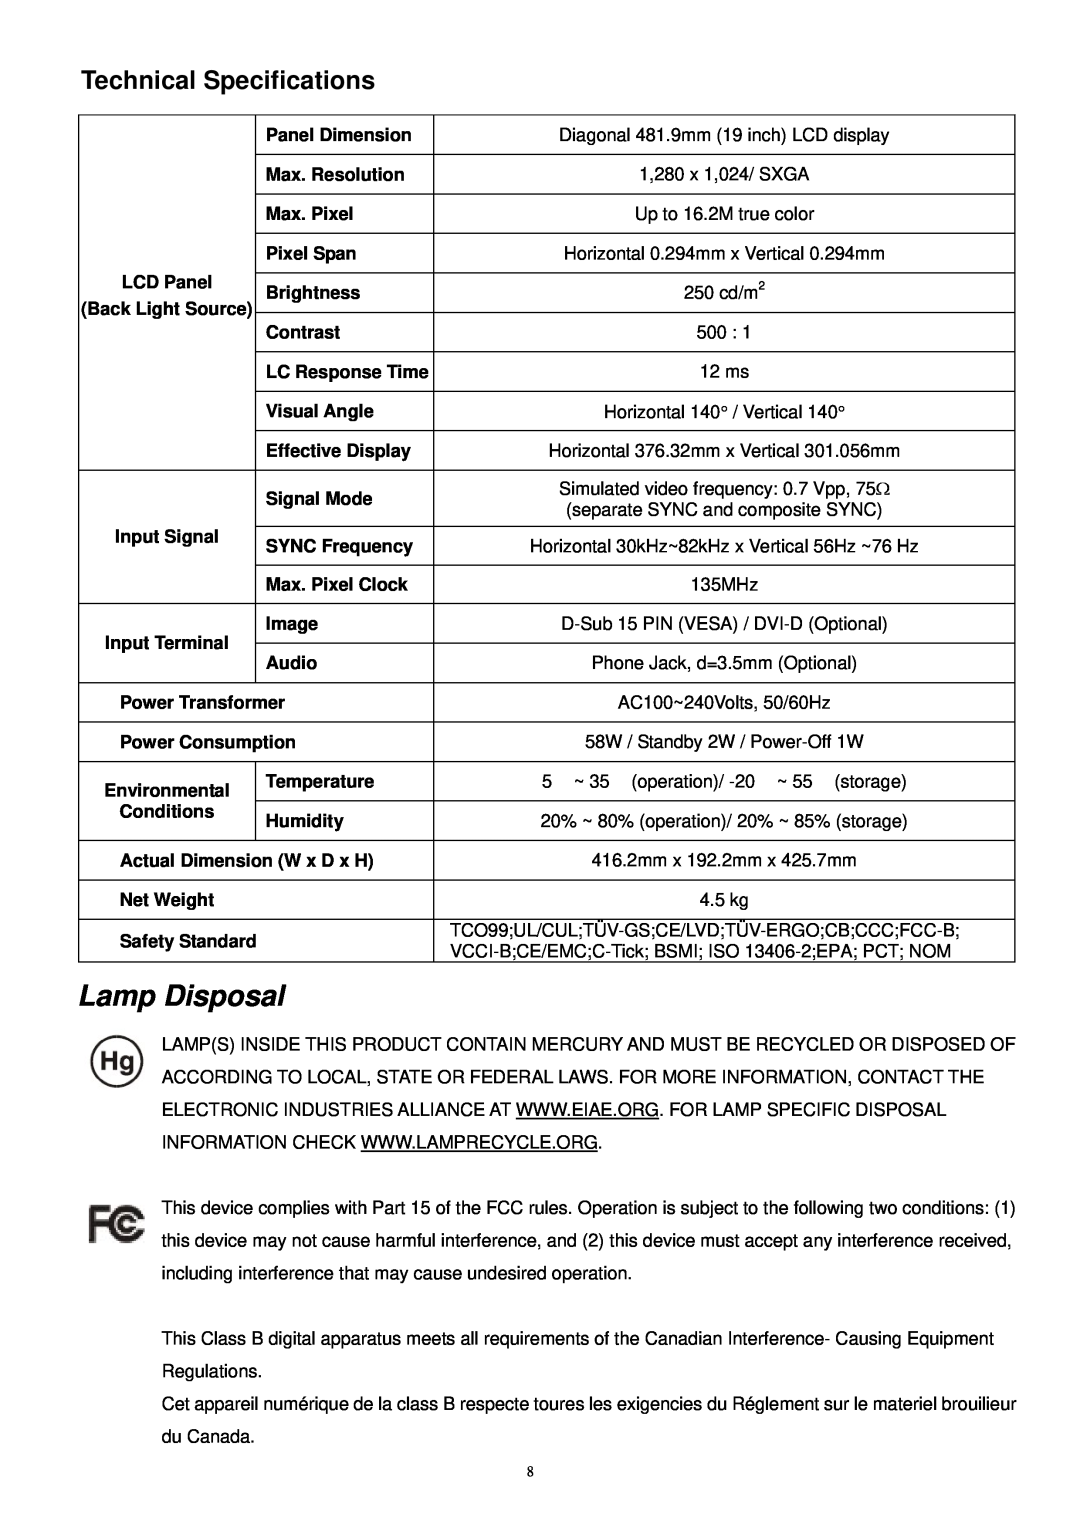 Acer AL1917C technical specifications Technical Specifications, Lamp Disposal 